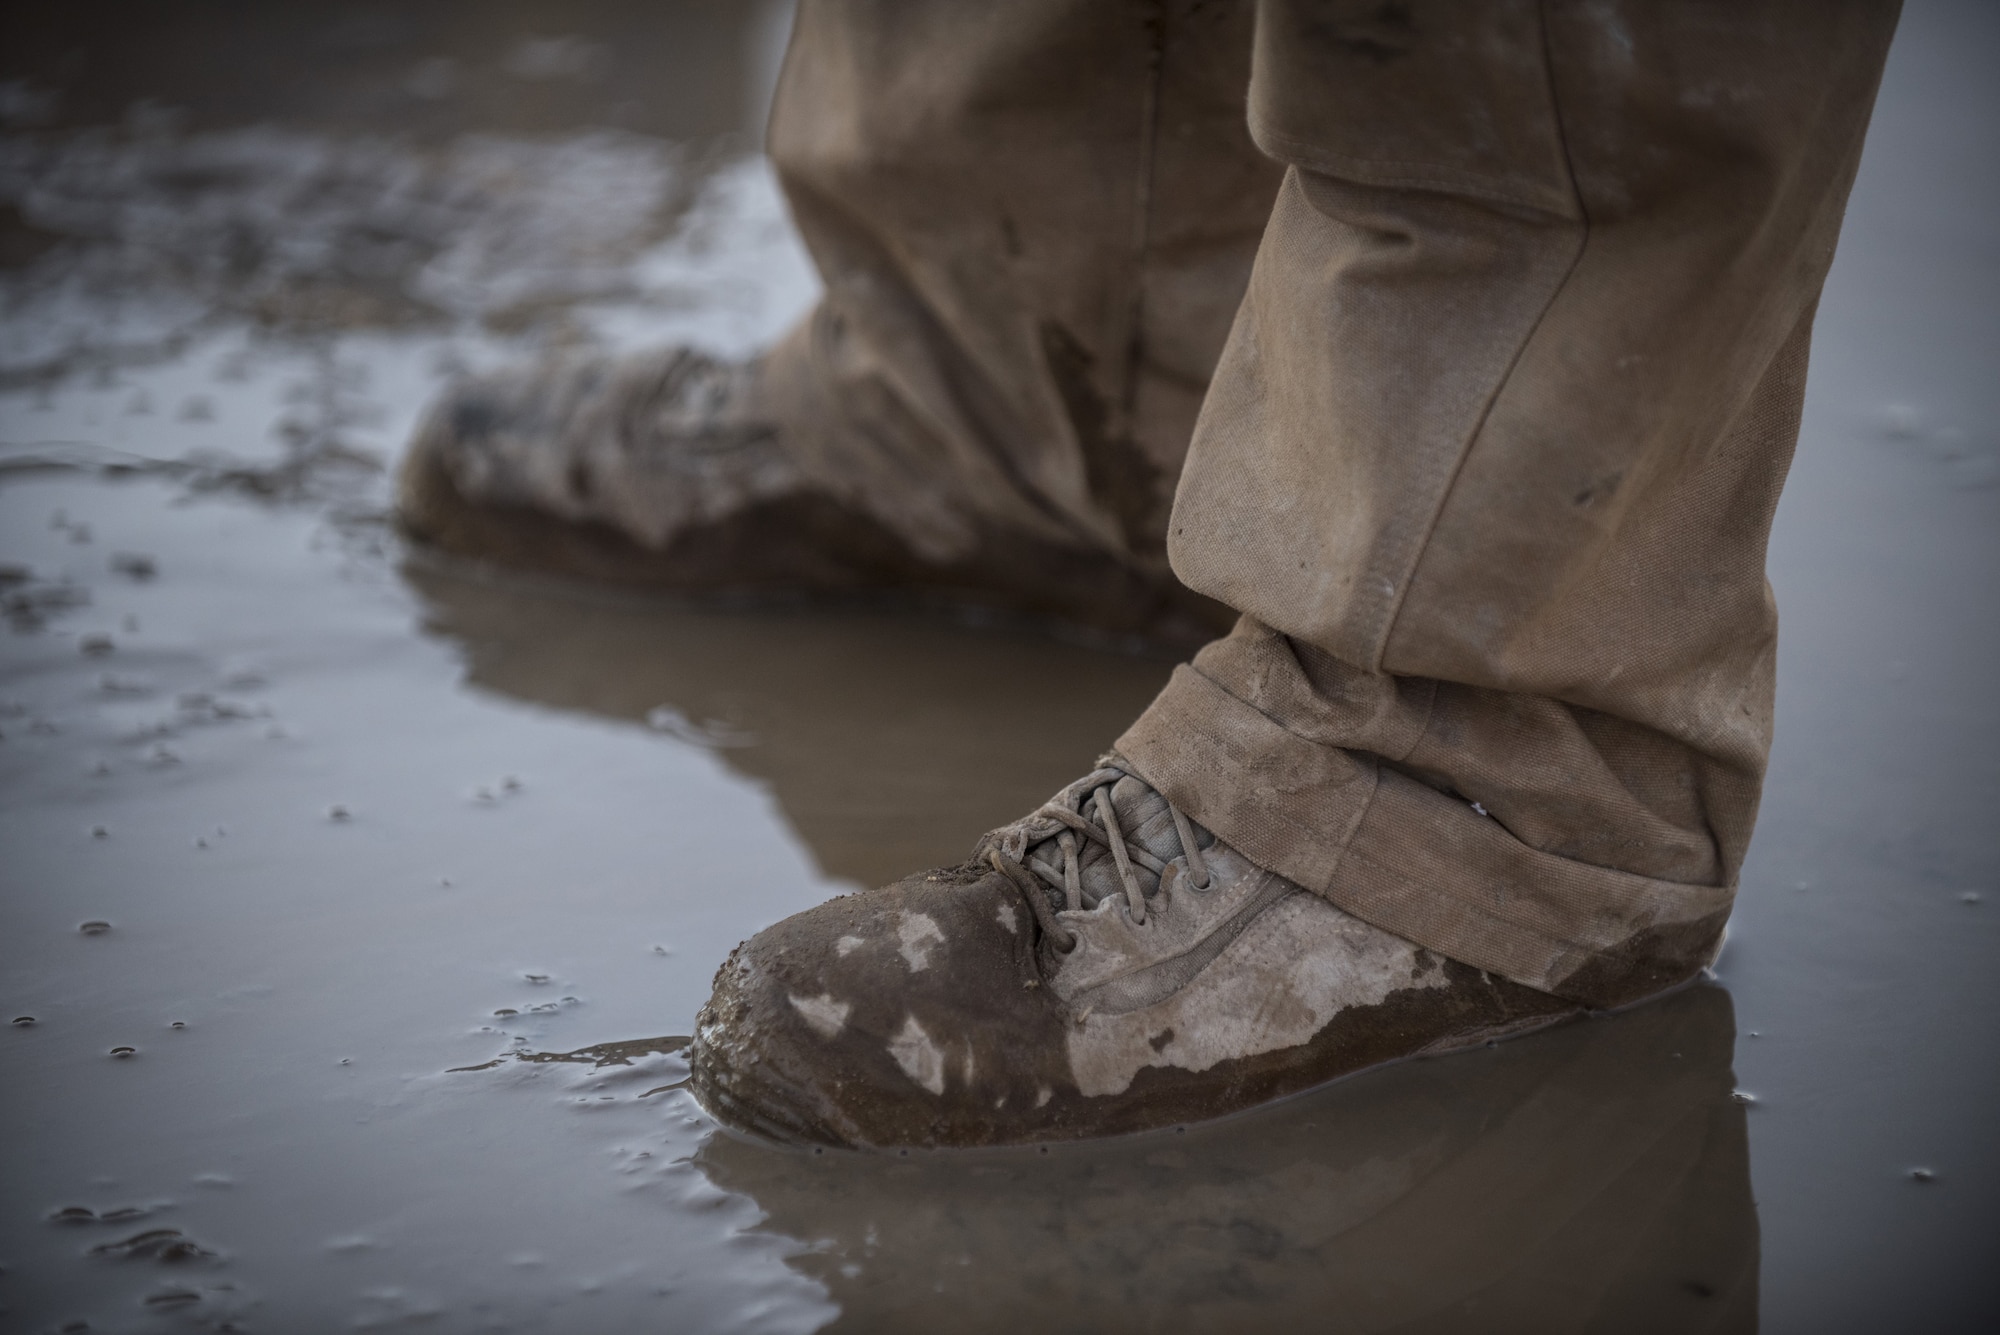 An Airman assigned to the 557th Expeditionary RED HORSE Squadron stand in a puddle of fresh groundwater on the site of a newly-drilled well January 31, 2018 at an undisclosed location in Southwest Asia. This 1,500 ft deep well, and two other like it, will provide potable water for future facilities as the coalition works to establish an enduring presence in the region. (U.S. Air Force photo by Staff Sgt. Joshua Kleinholz)